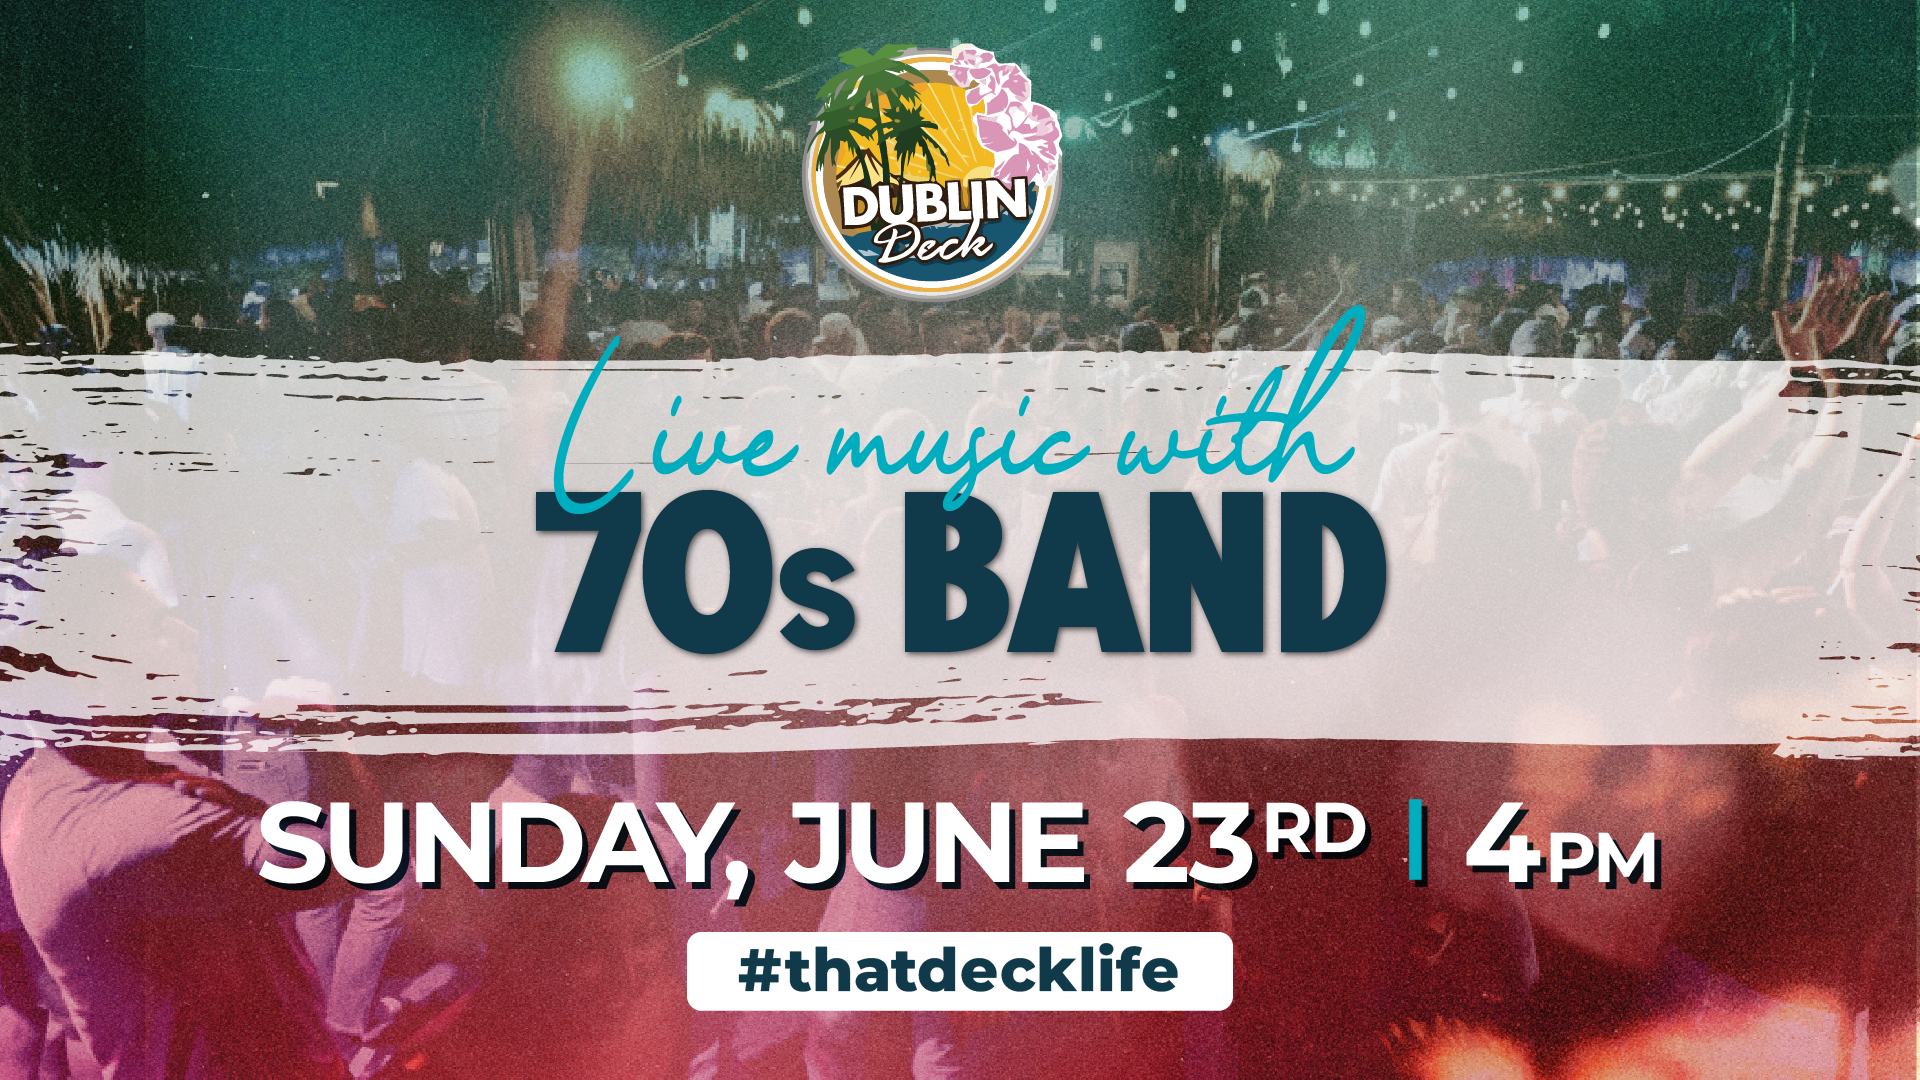 flyer for live music by 70's band on june 23 at 7pm